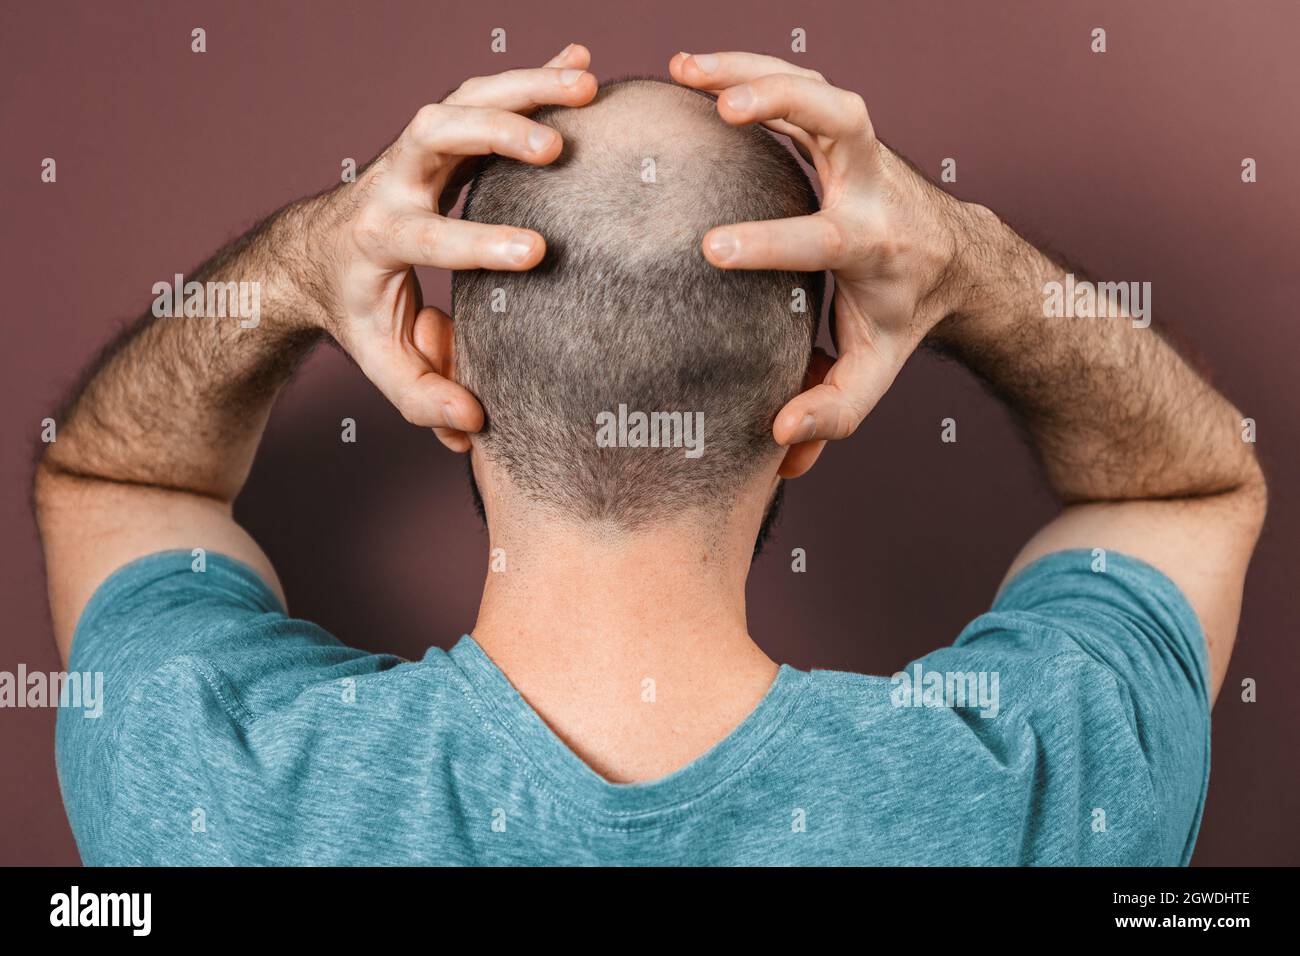 Baldy man grabs his head with his hands. Rear view. Brown background. The concept of alopecia and baldness. Stock Photo